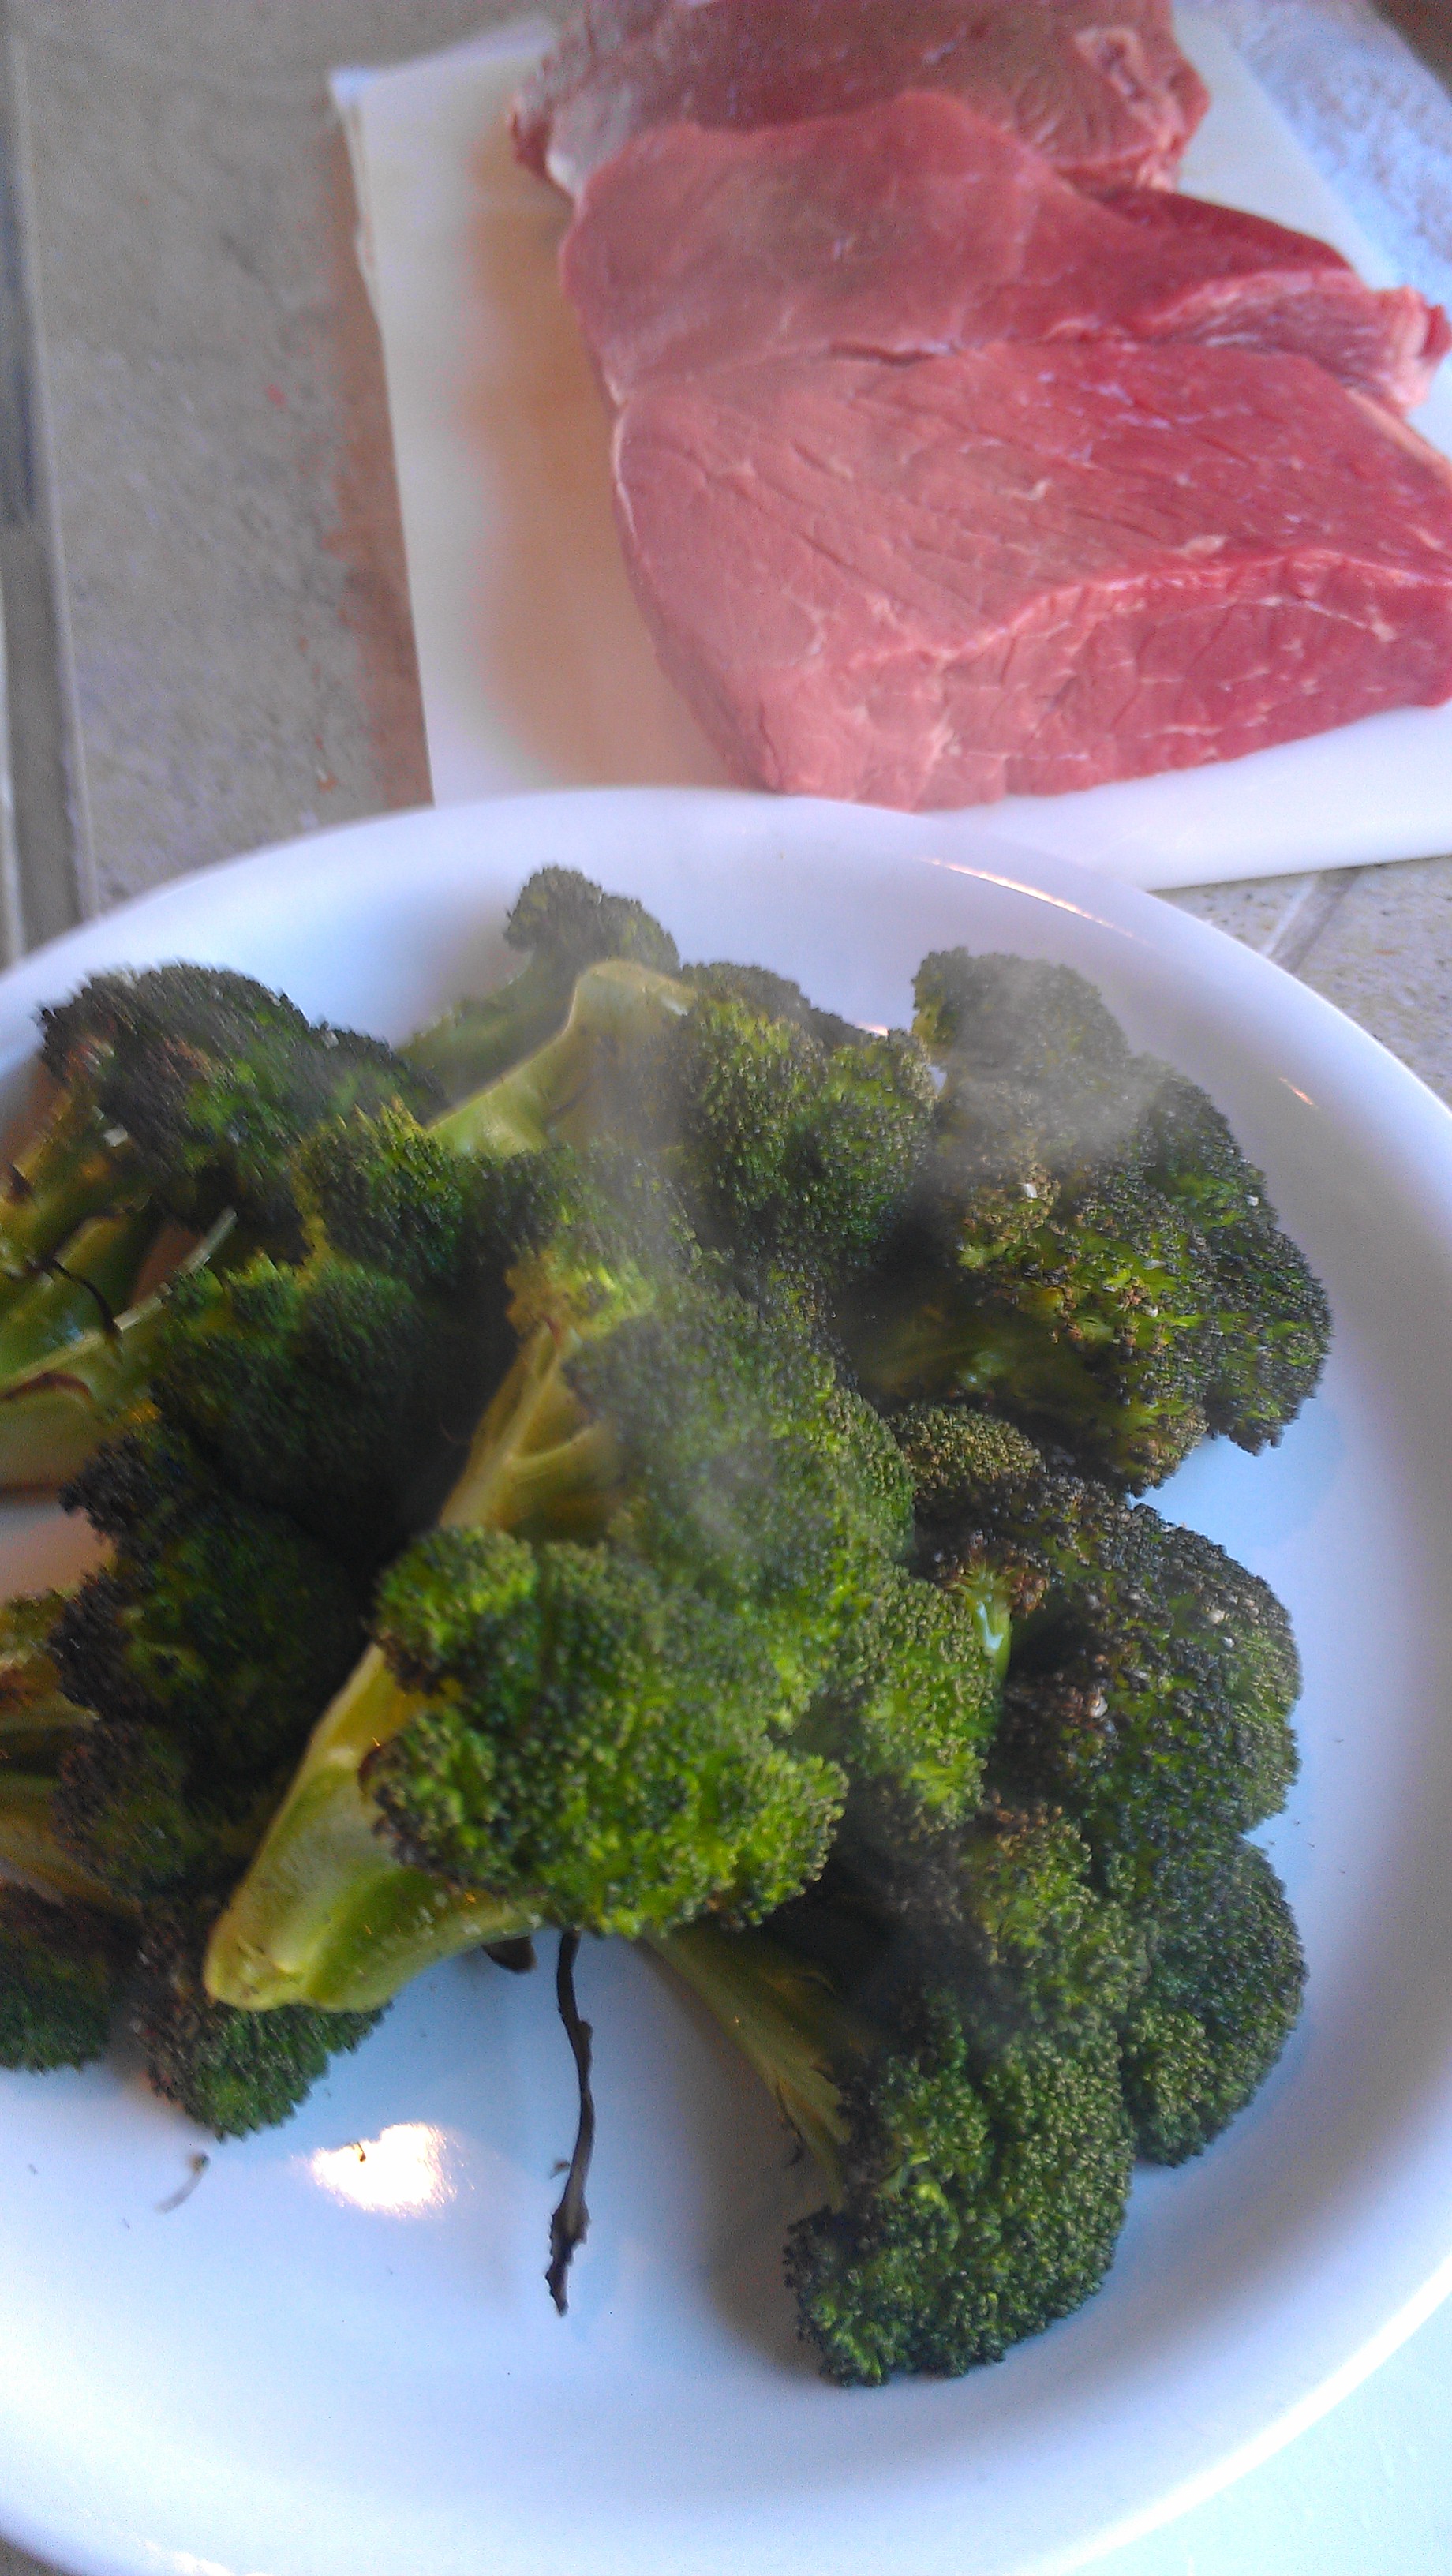 Roasted broccoli and sirloin pic